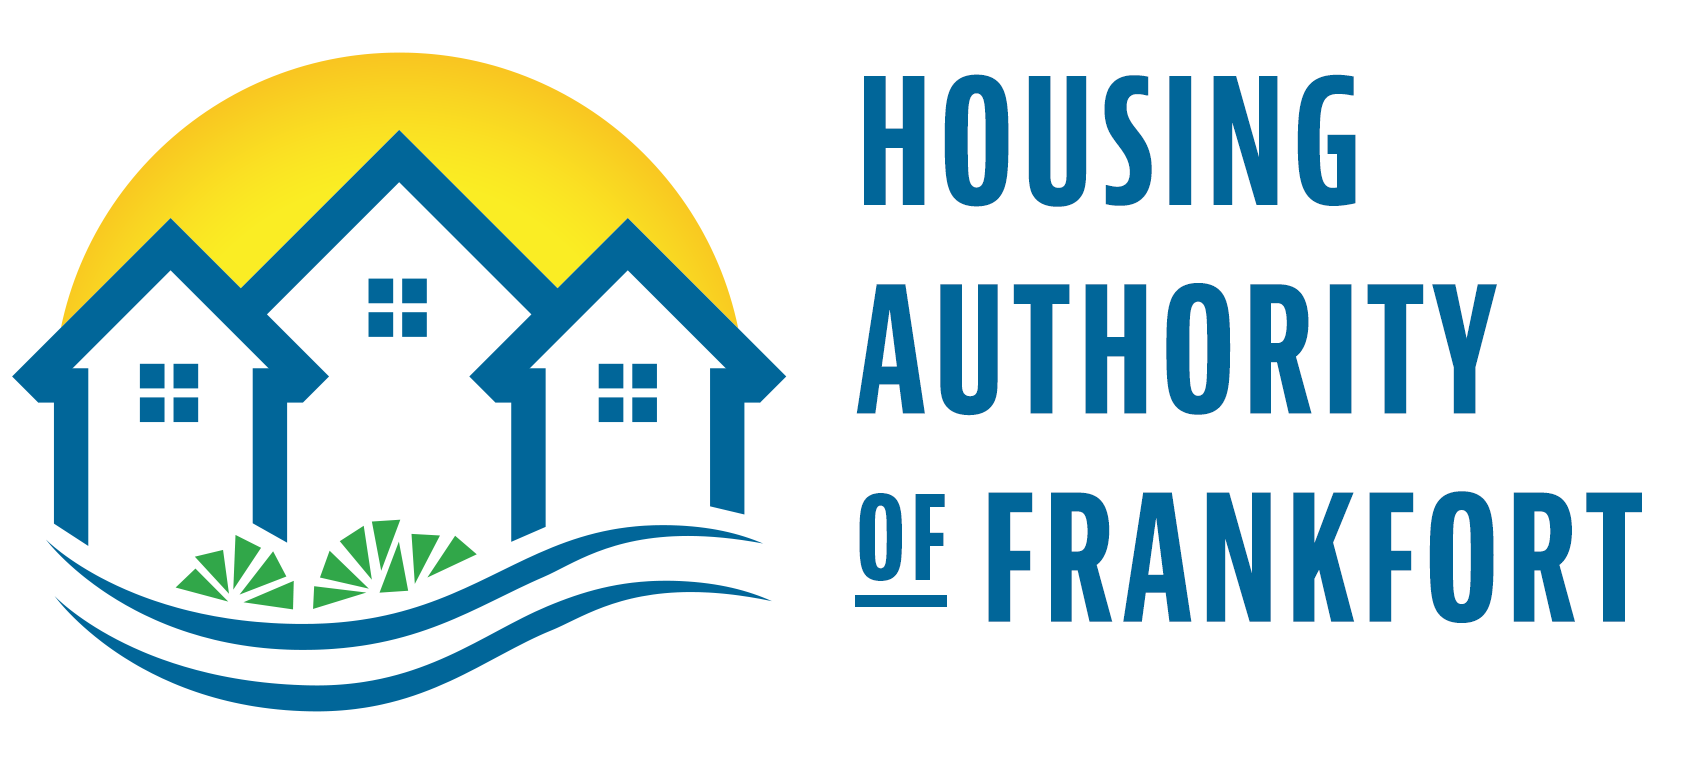 Housing Authority of Frankfort